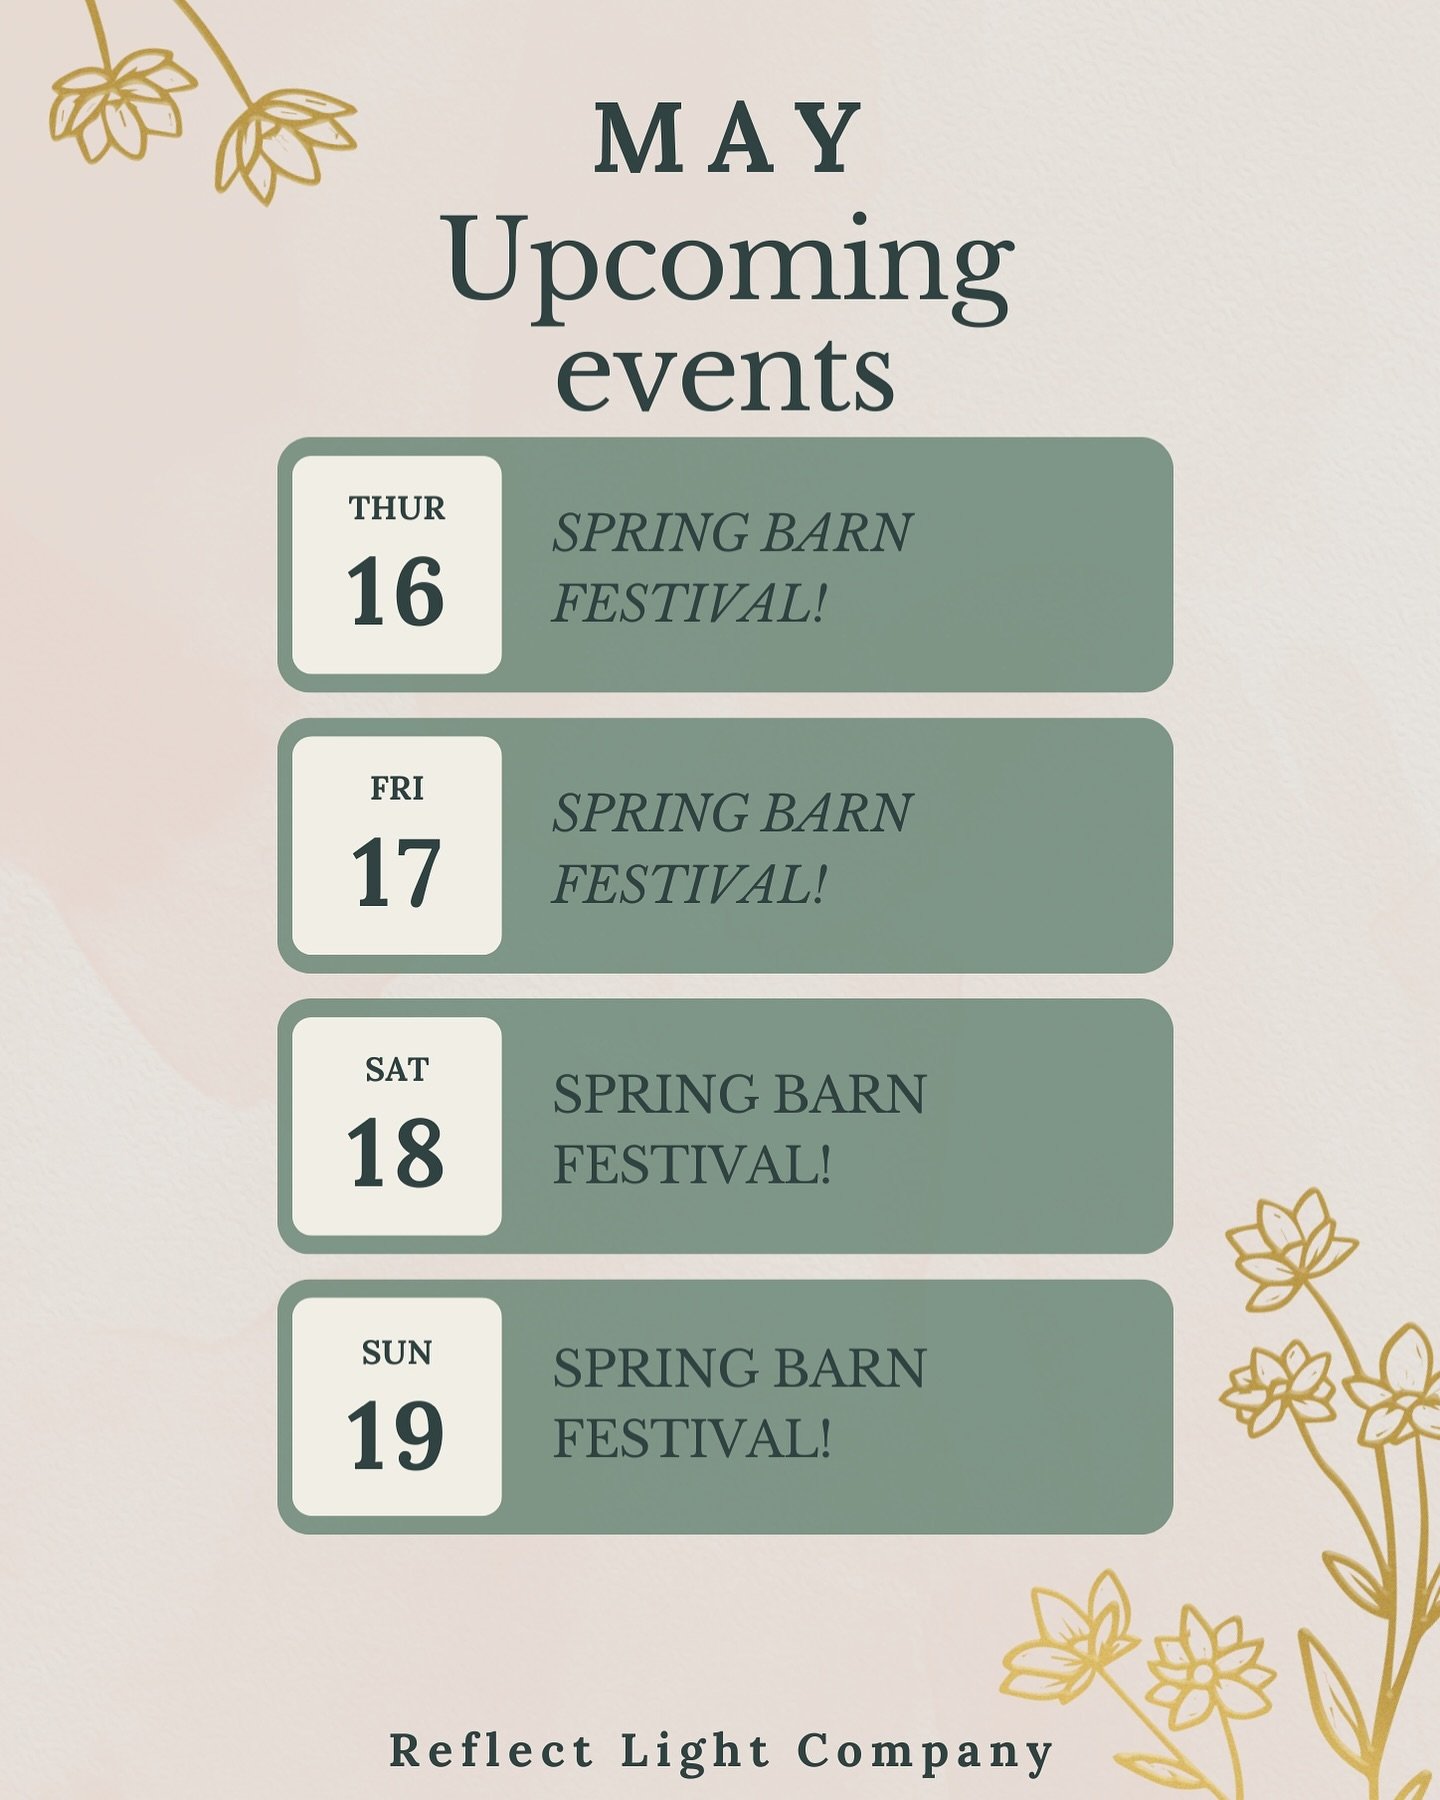 When I say I cannot wait for this event I mean I CANNOT WAIT!!! 🙌🏻

The Spring @barnfestival is starting tomorrow! 💗

I just finished packing my totes with a TON of natural skincare products and I can&rsquo;t wait to set up my booth today! 

Head 